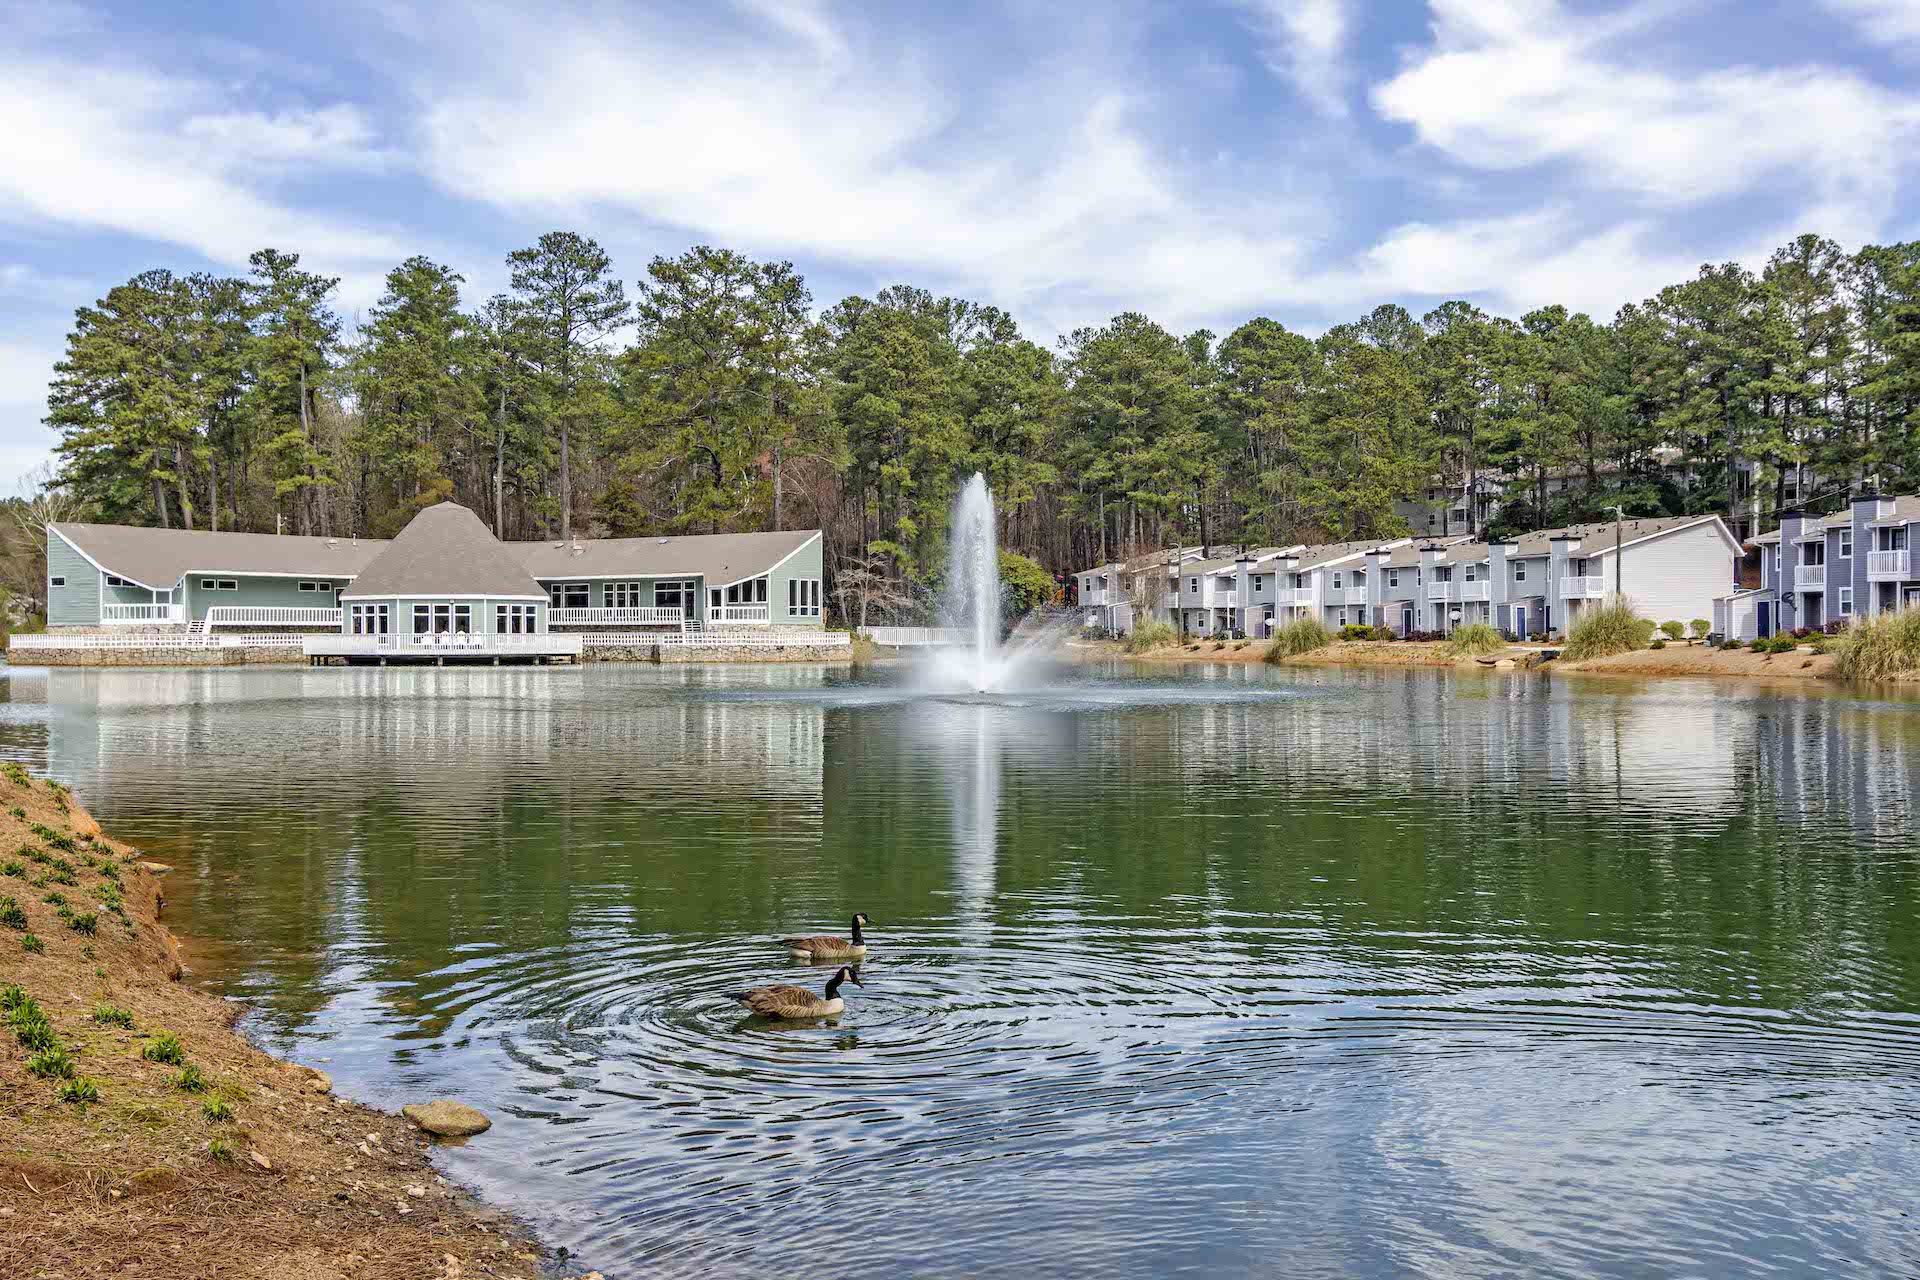 Across the lake view of Elliot Roswell apartment community